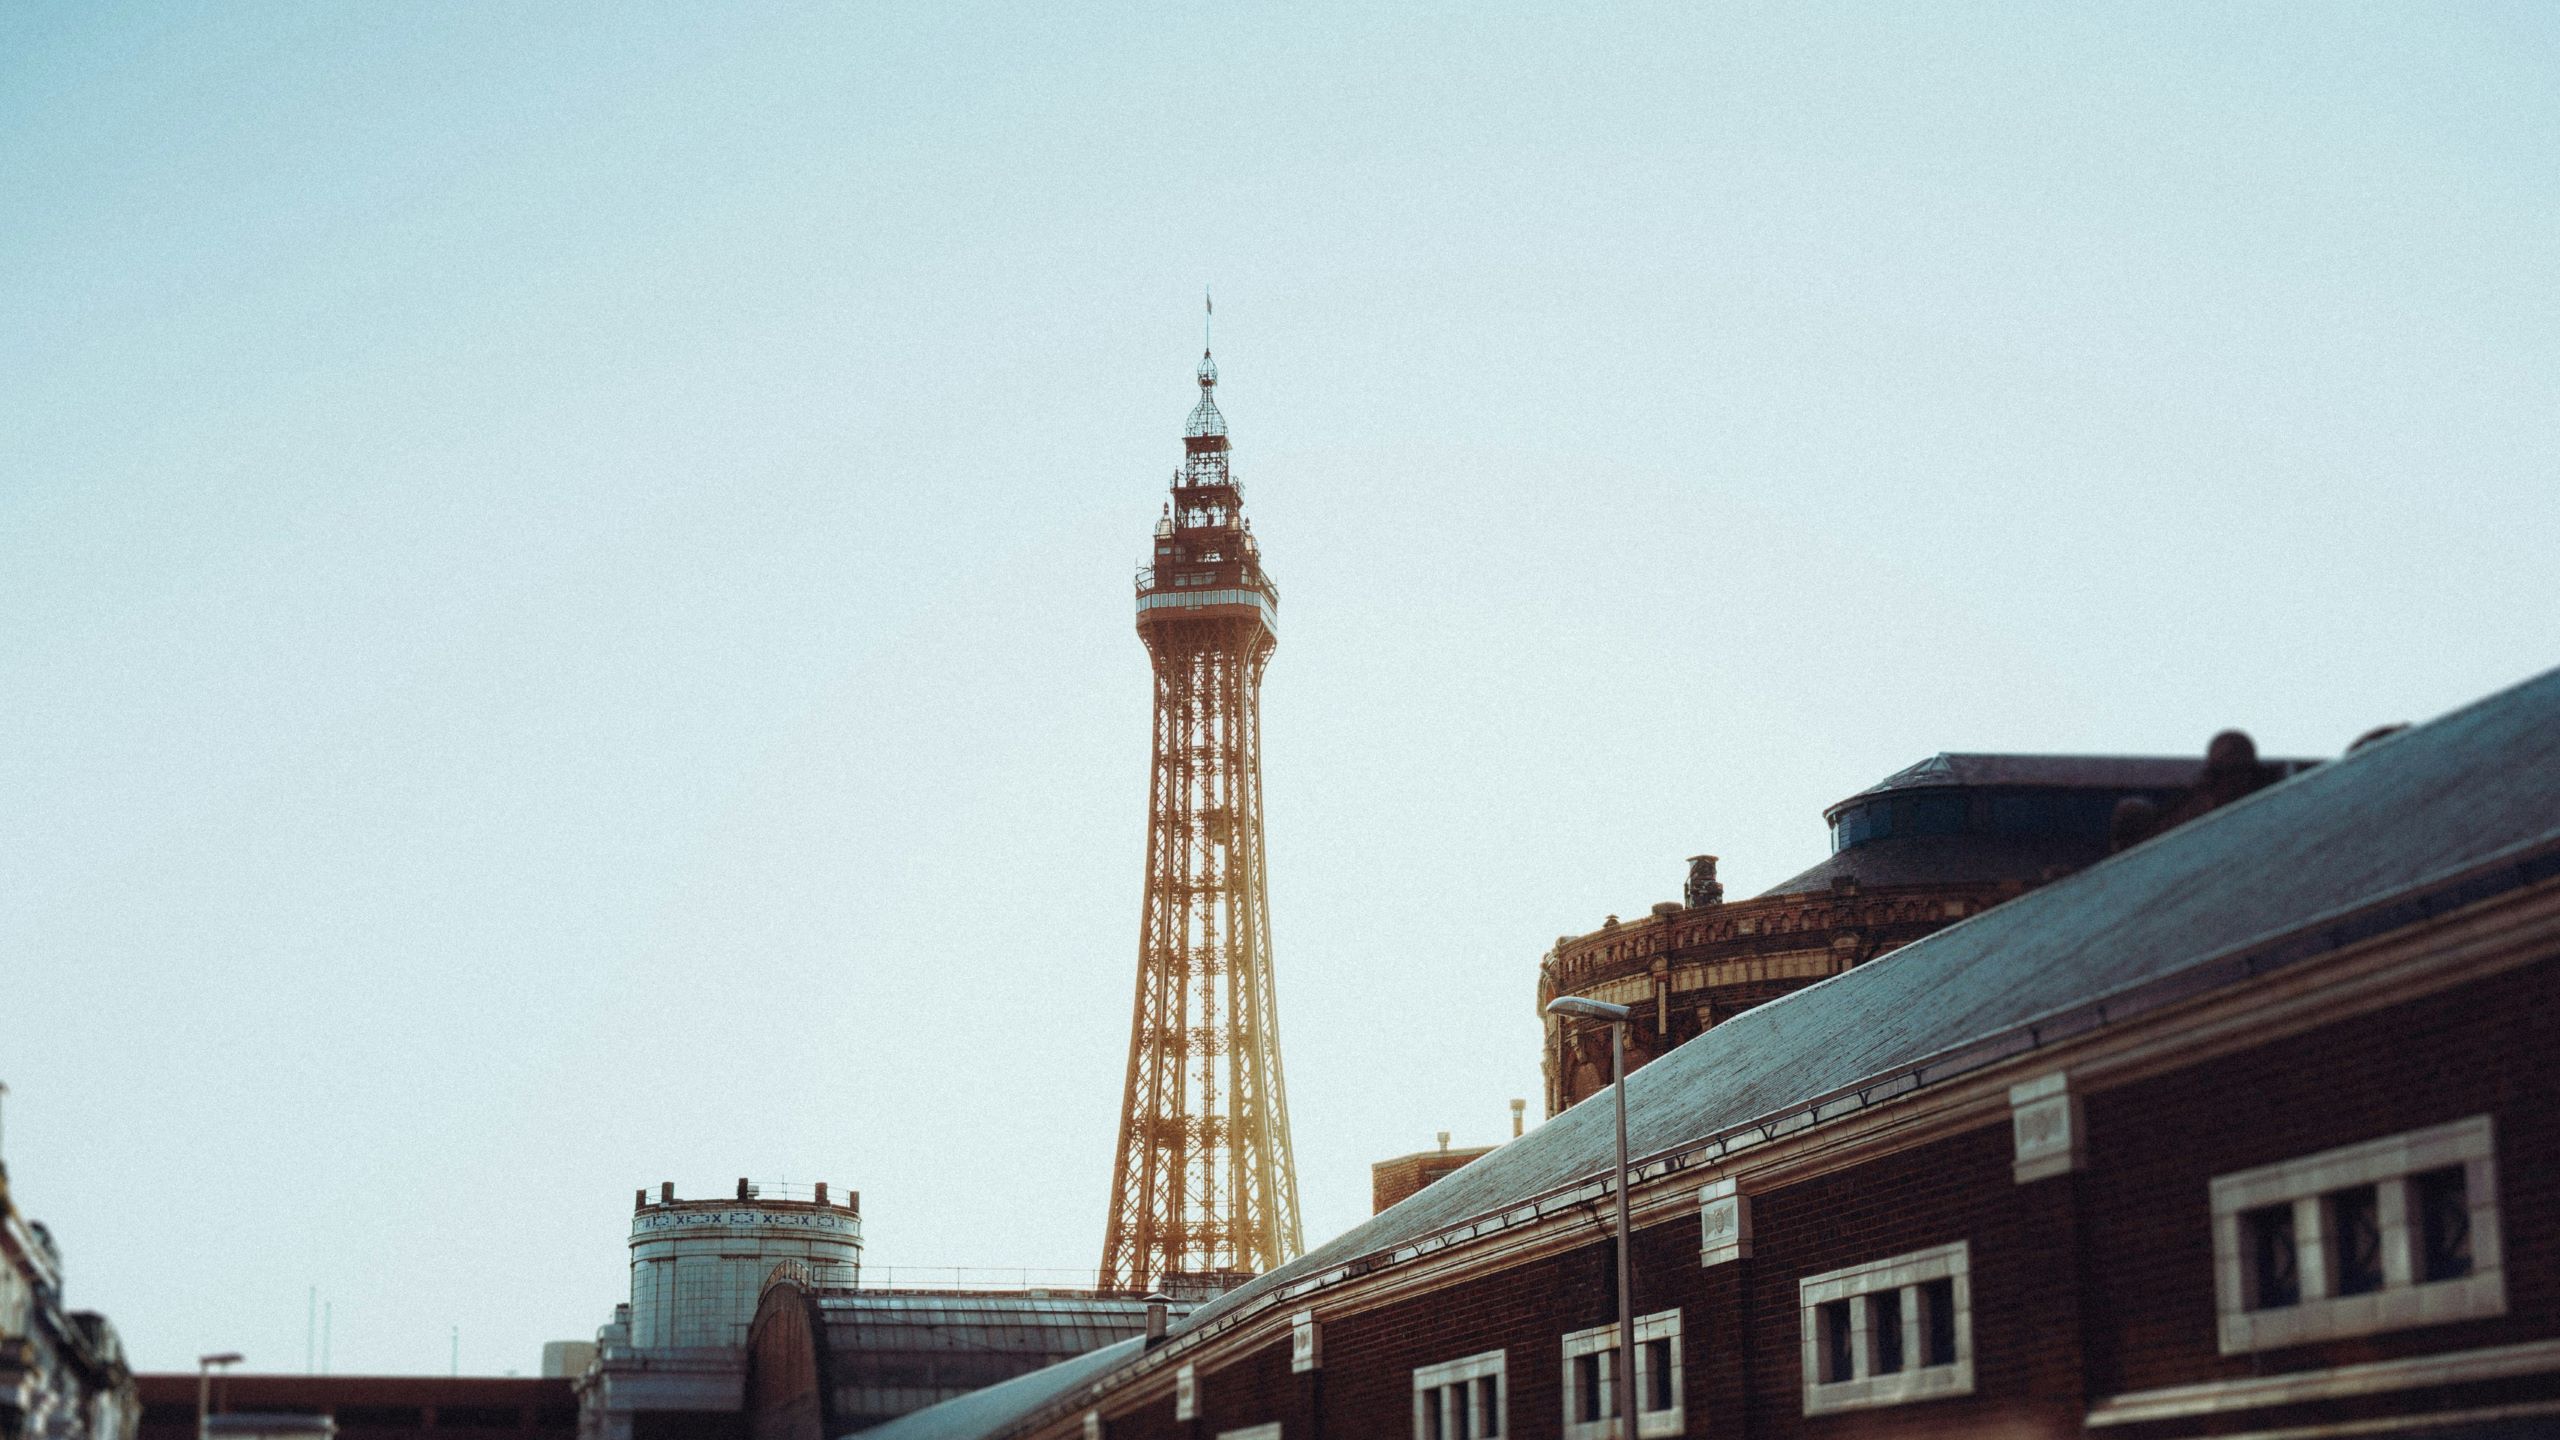 The symbol of Blackpool, the Blackpool Tower, which is inspired by the Eiffel Tower.